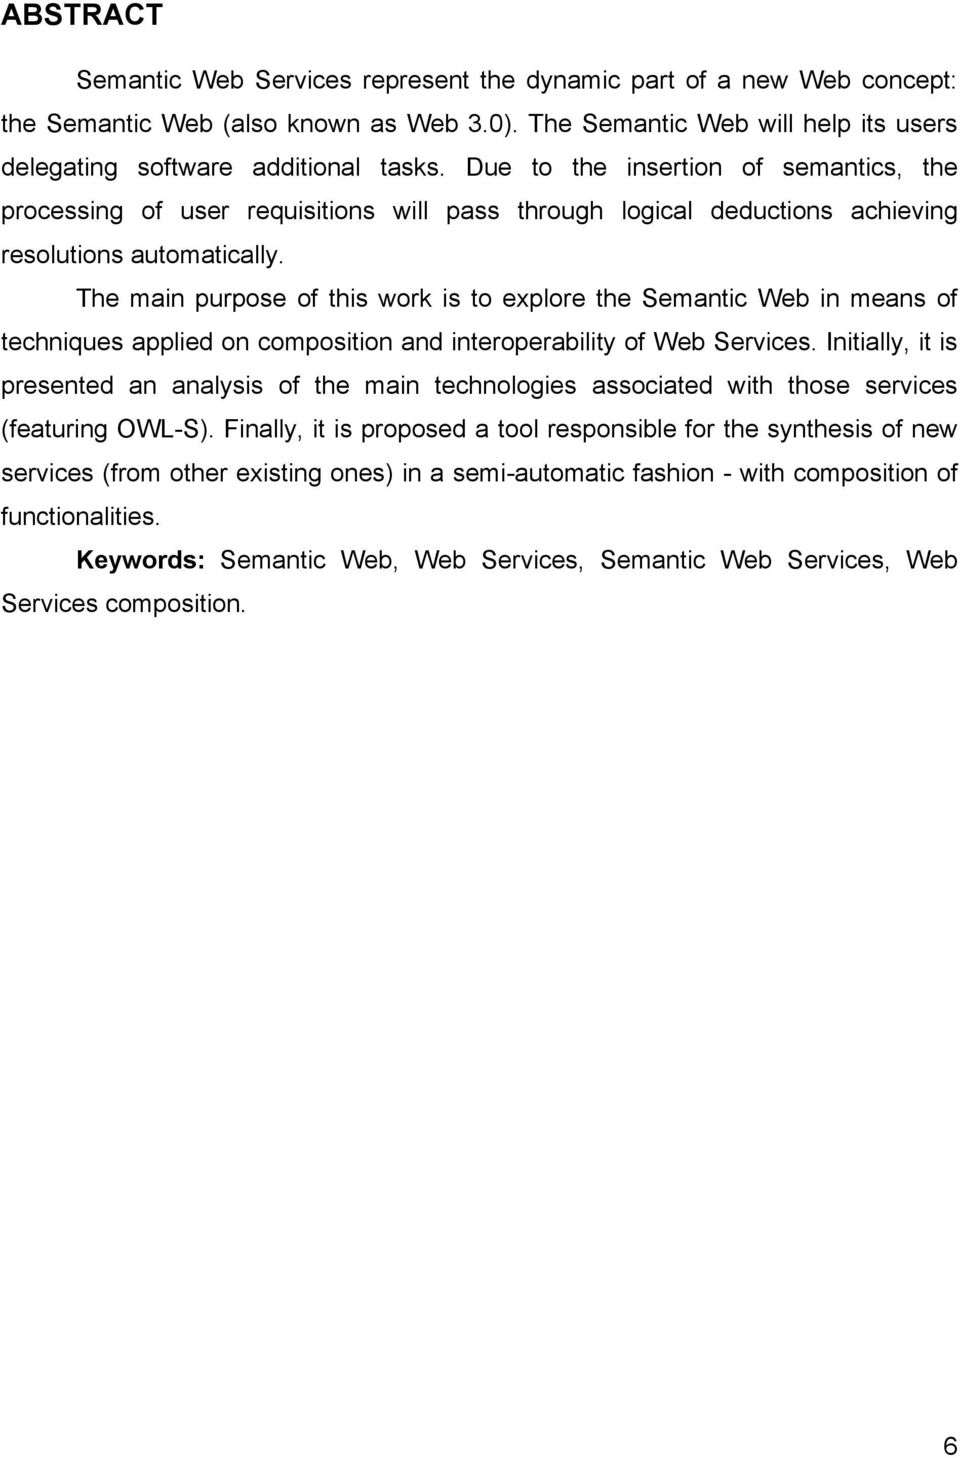 The main purpose of this work is to explore the Semantic Web in means of techniques applied on composition and interoperability of Web Services.